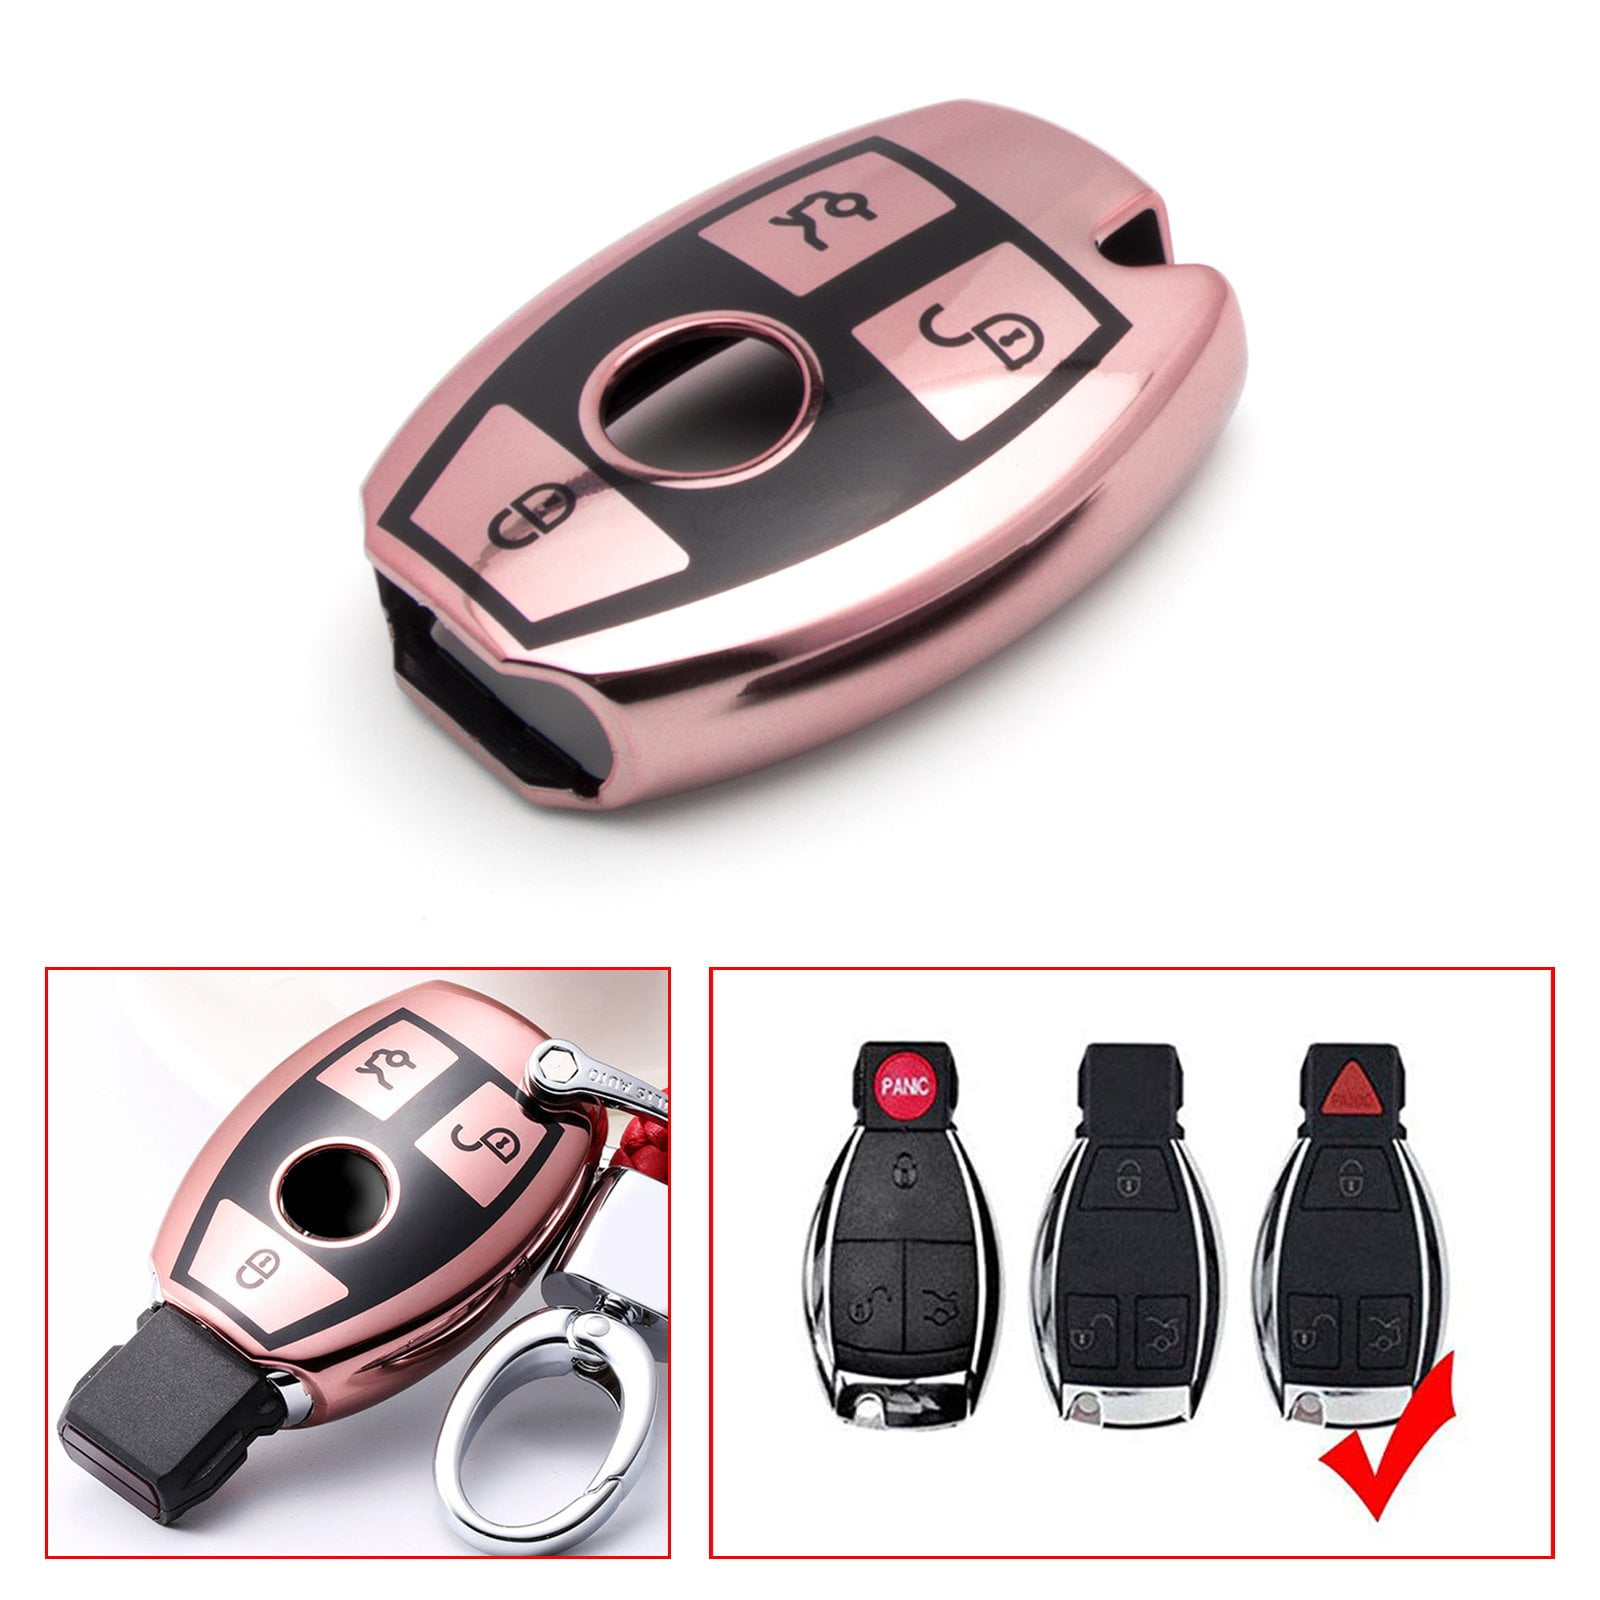 Full Sealed TPU Smart Remote Keyless Key Cover Case Shell For Mercedes Benz FOB 